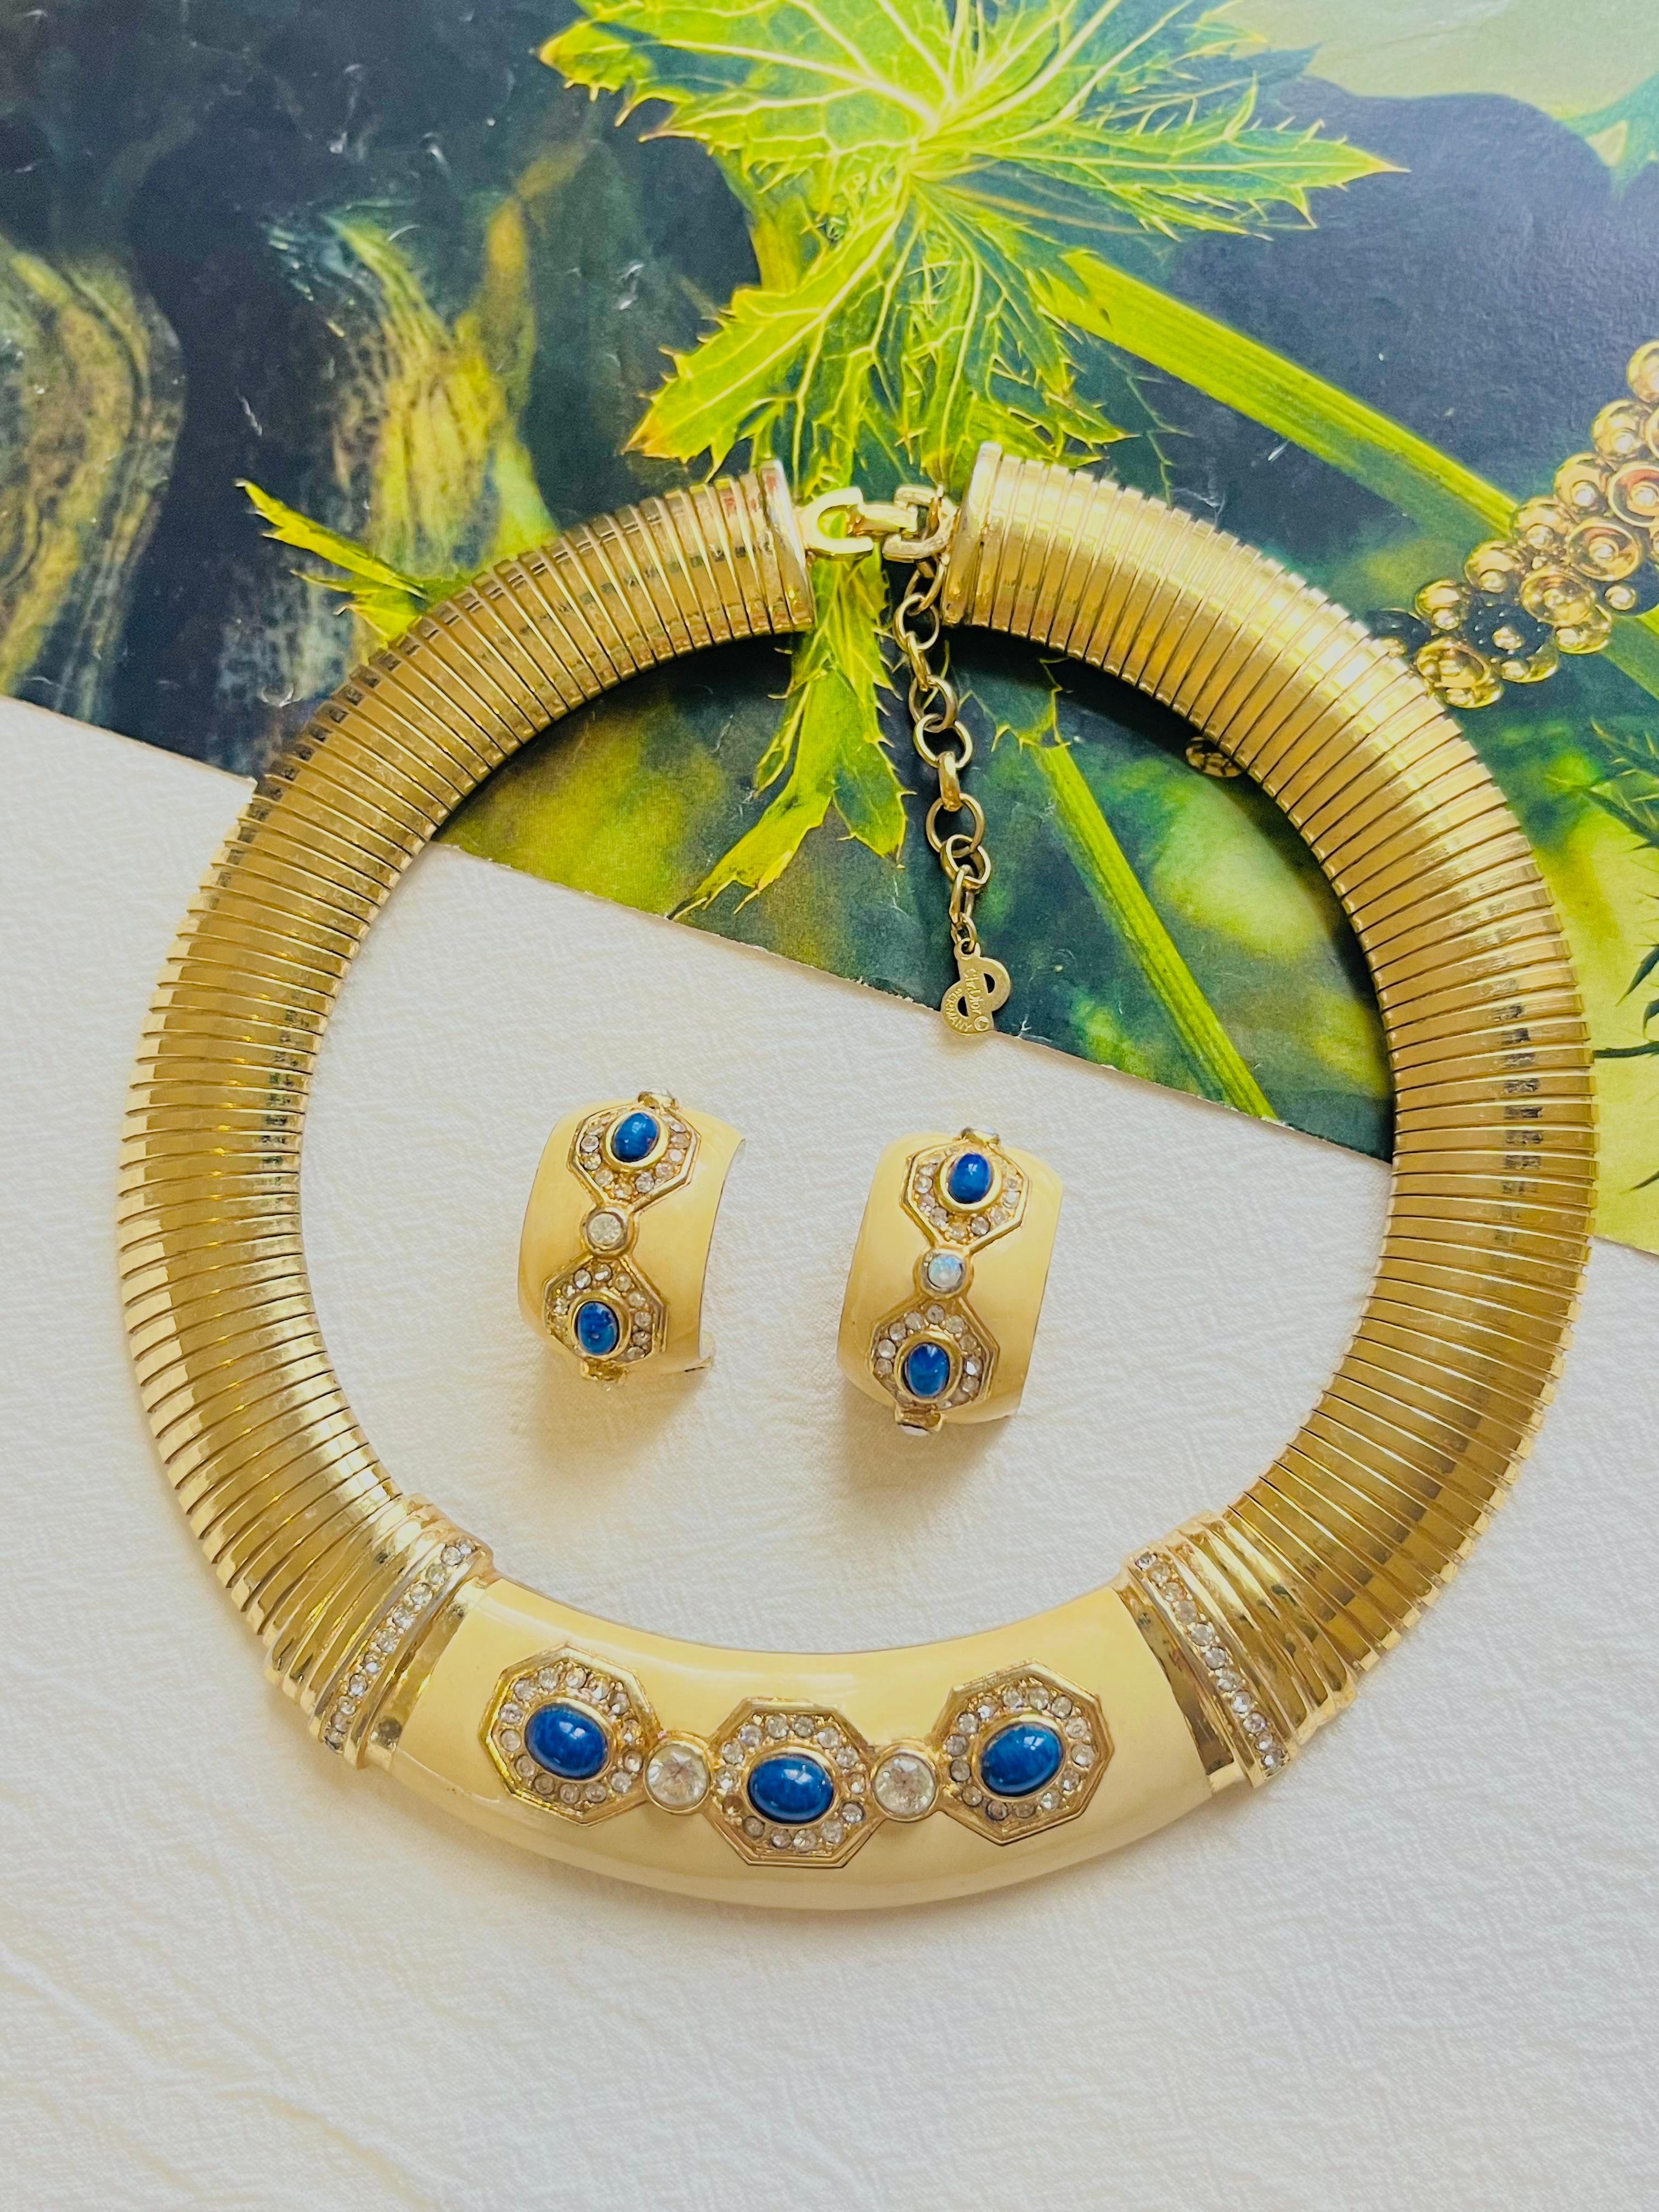 Christian Dior Vintage Yellow Enamel Lapis Navy Oval Crystals Cabochon Omega Collar Necklace Semi Dome Earrings Jewellery Set, Gold Tone

Very good condition. Some scratches or colour loss, barely noticeable. 

Vintage and rare to find. 100%